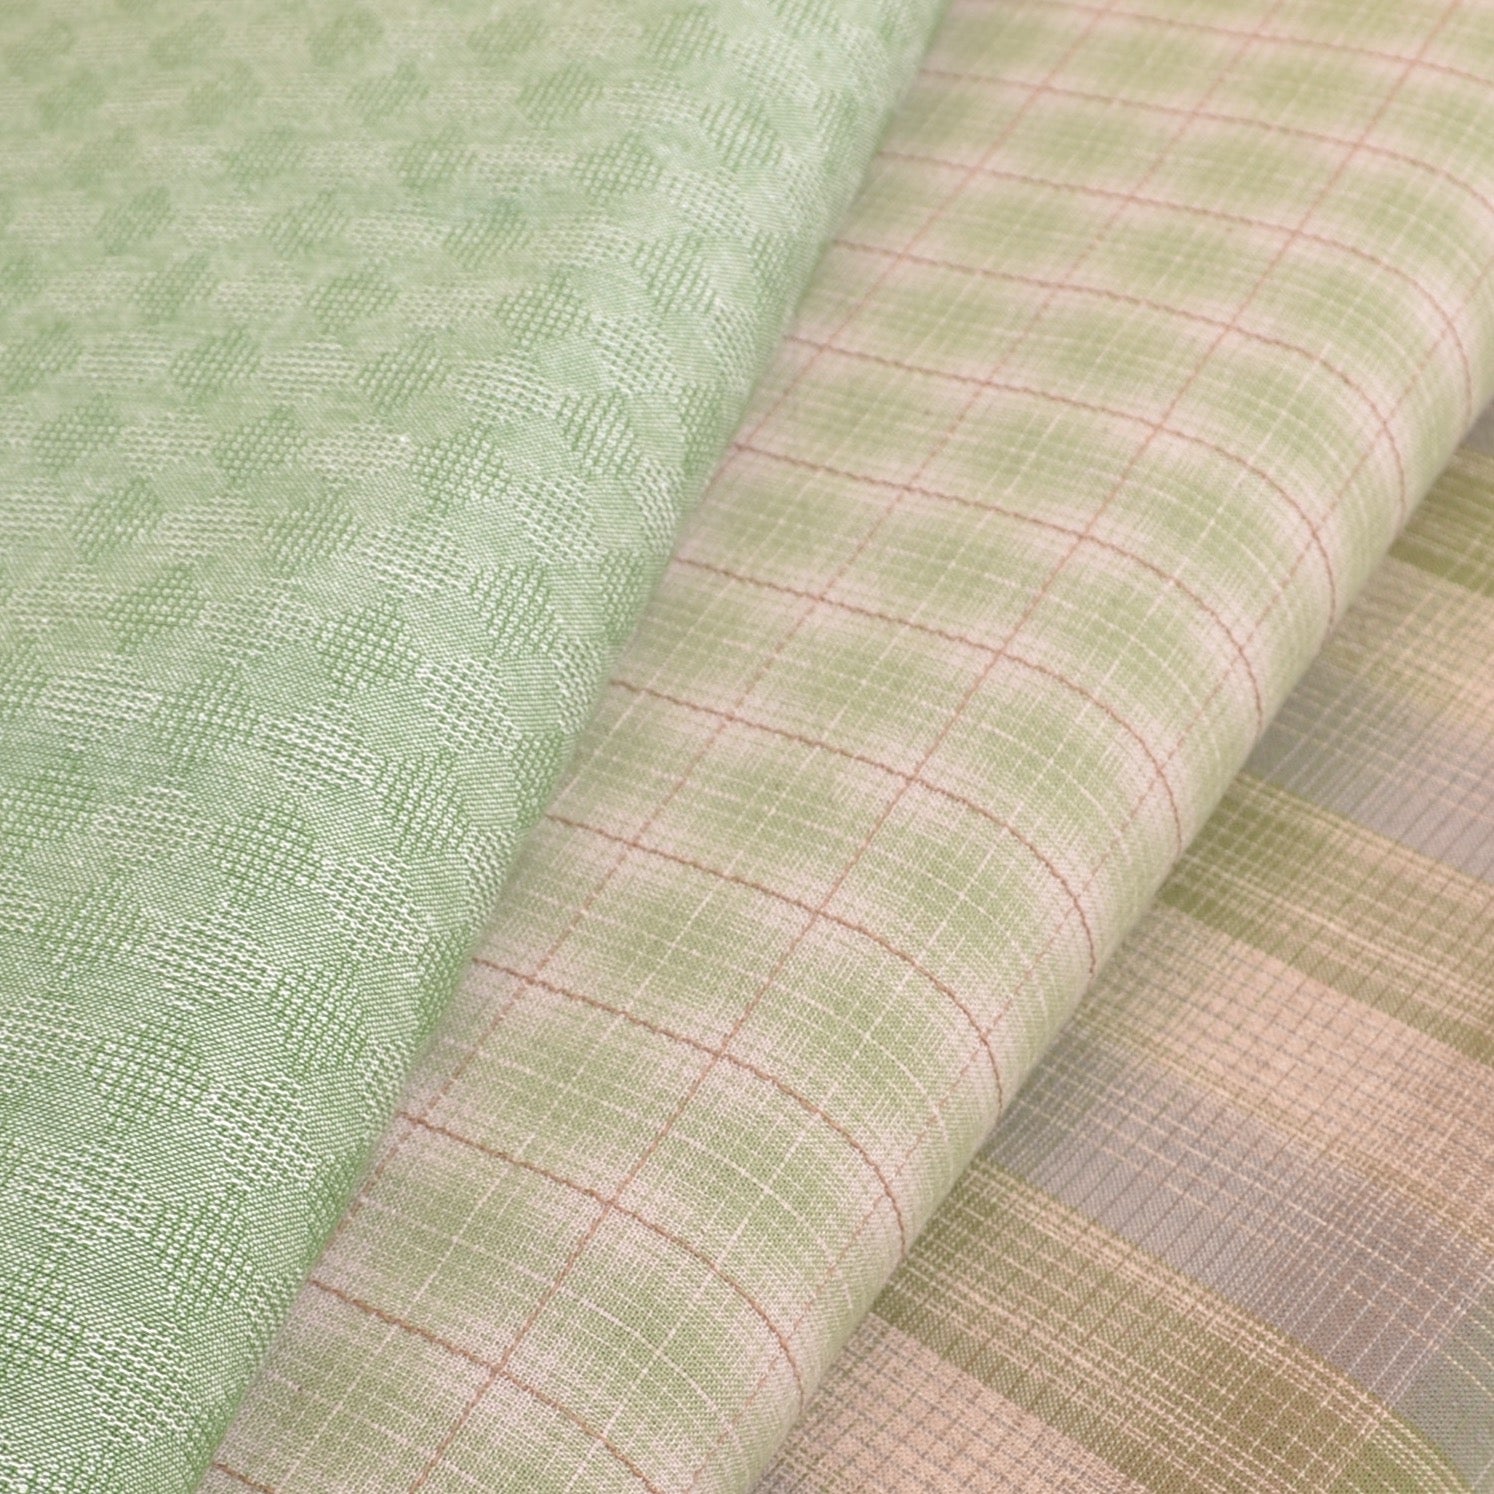 Japanese cotton fabrics for sewing clothing, quilts and home decor